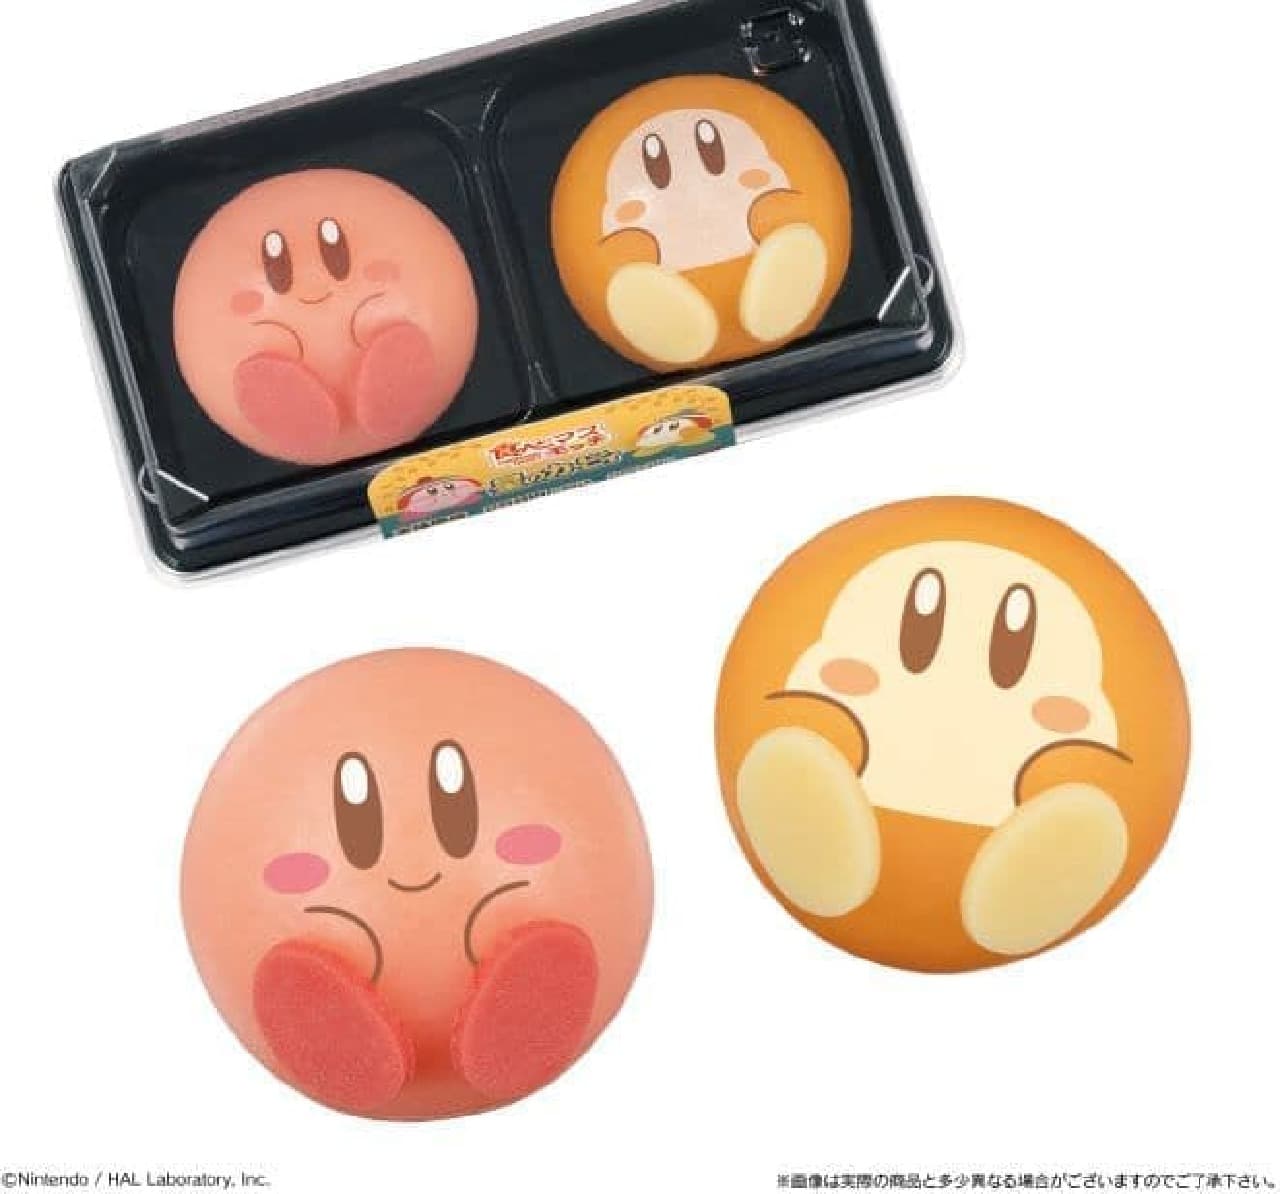 Lawson "Eat Masmocchi Kirby of the Stars"